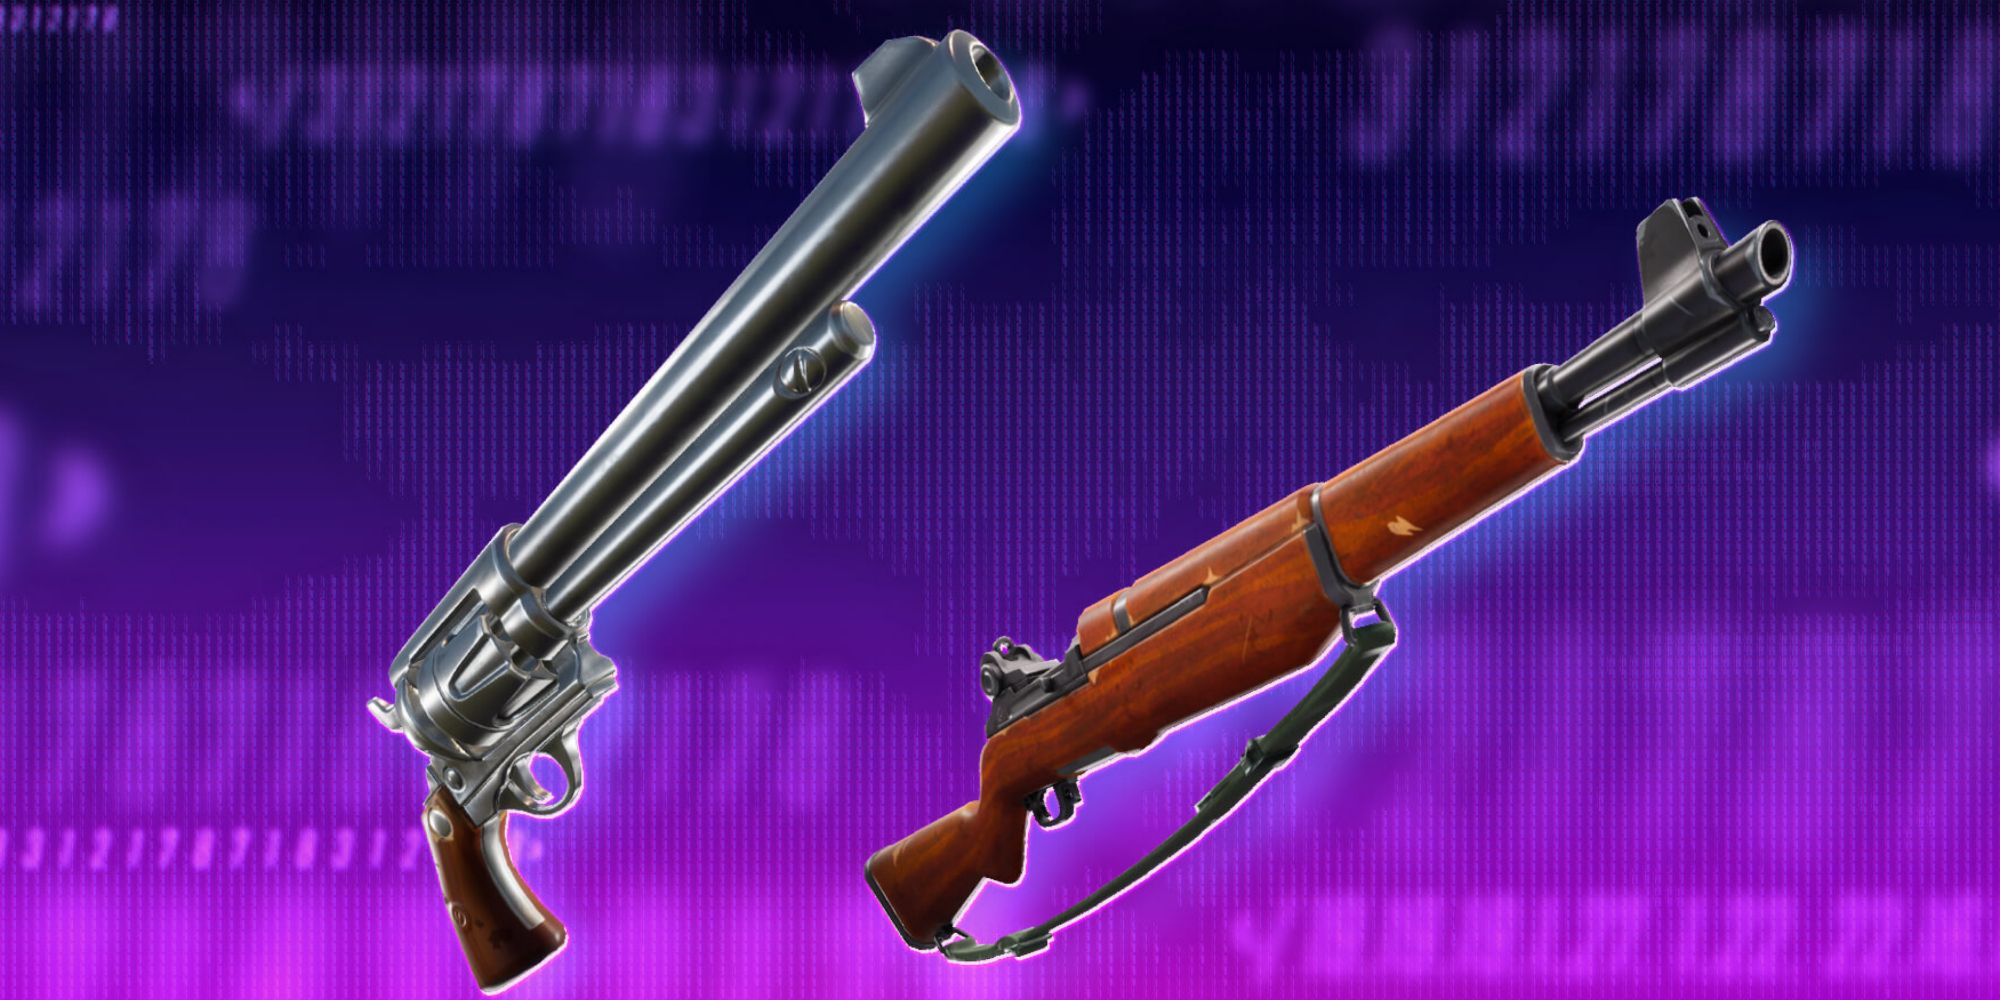 Fortnite: How To Find The Six Shooter And The Infantry Rifle